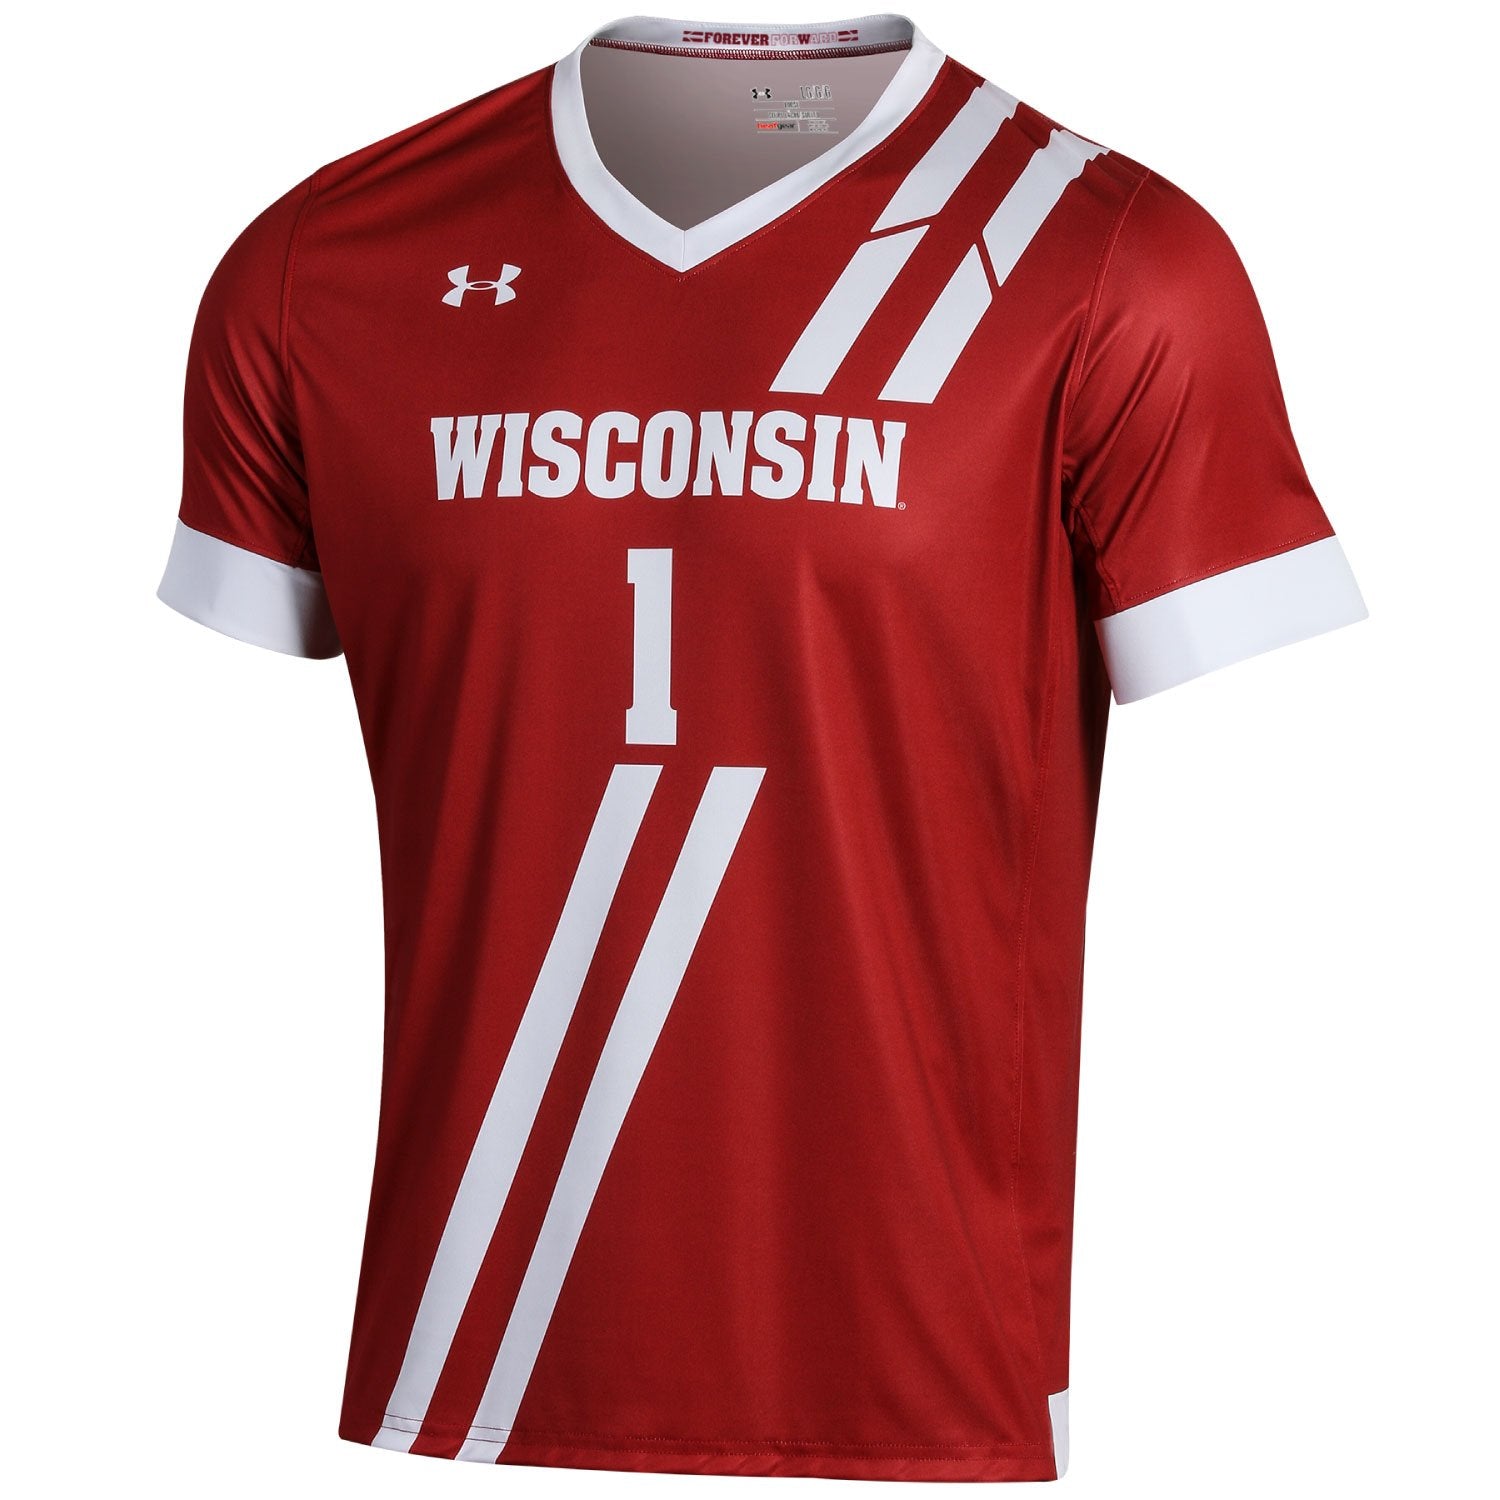 Wisconsin Badgers Under Armour Flawless Red #1 Light Speed Soccer Jersey